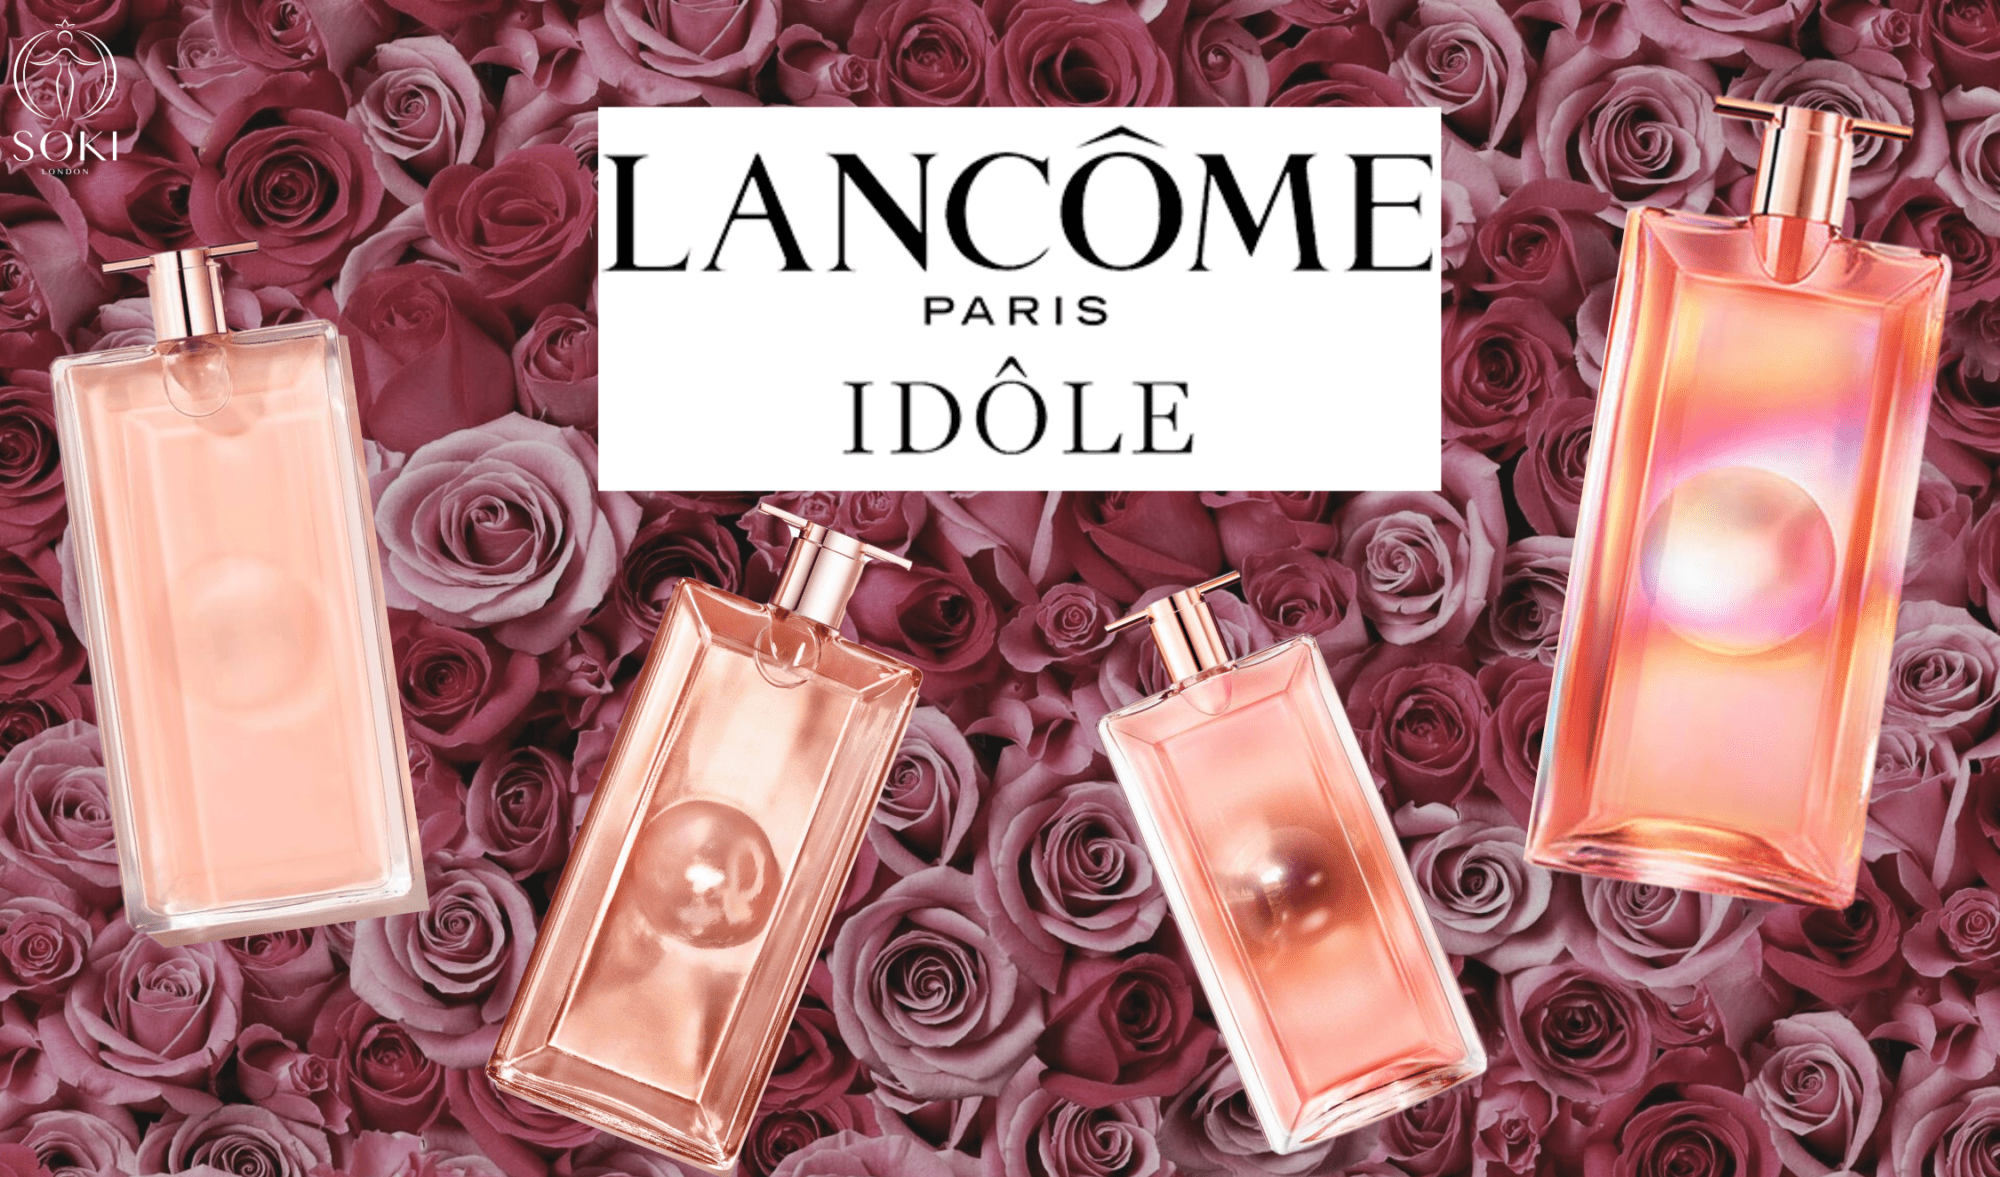 The Ultimate Guide To The Lancôme Idôle Perfumes